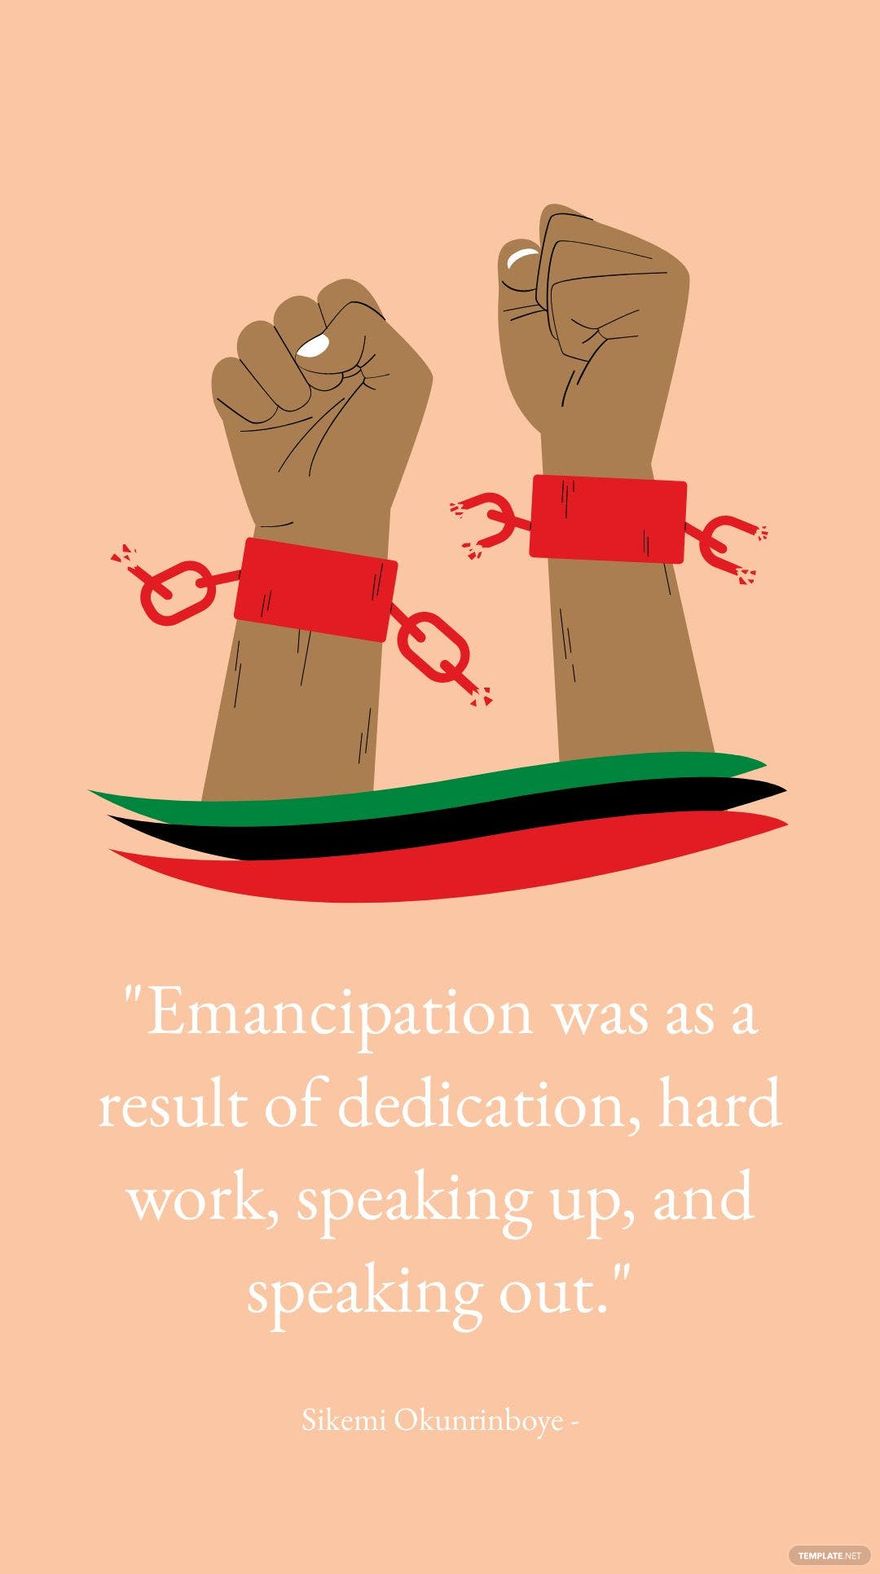 Sikemi Okunrinboye - Emancipation was as a result of dedication, hard work, speaking up, and speaking out.